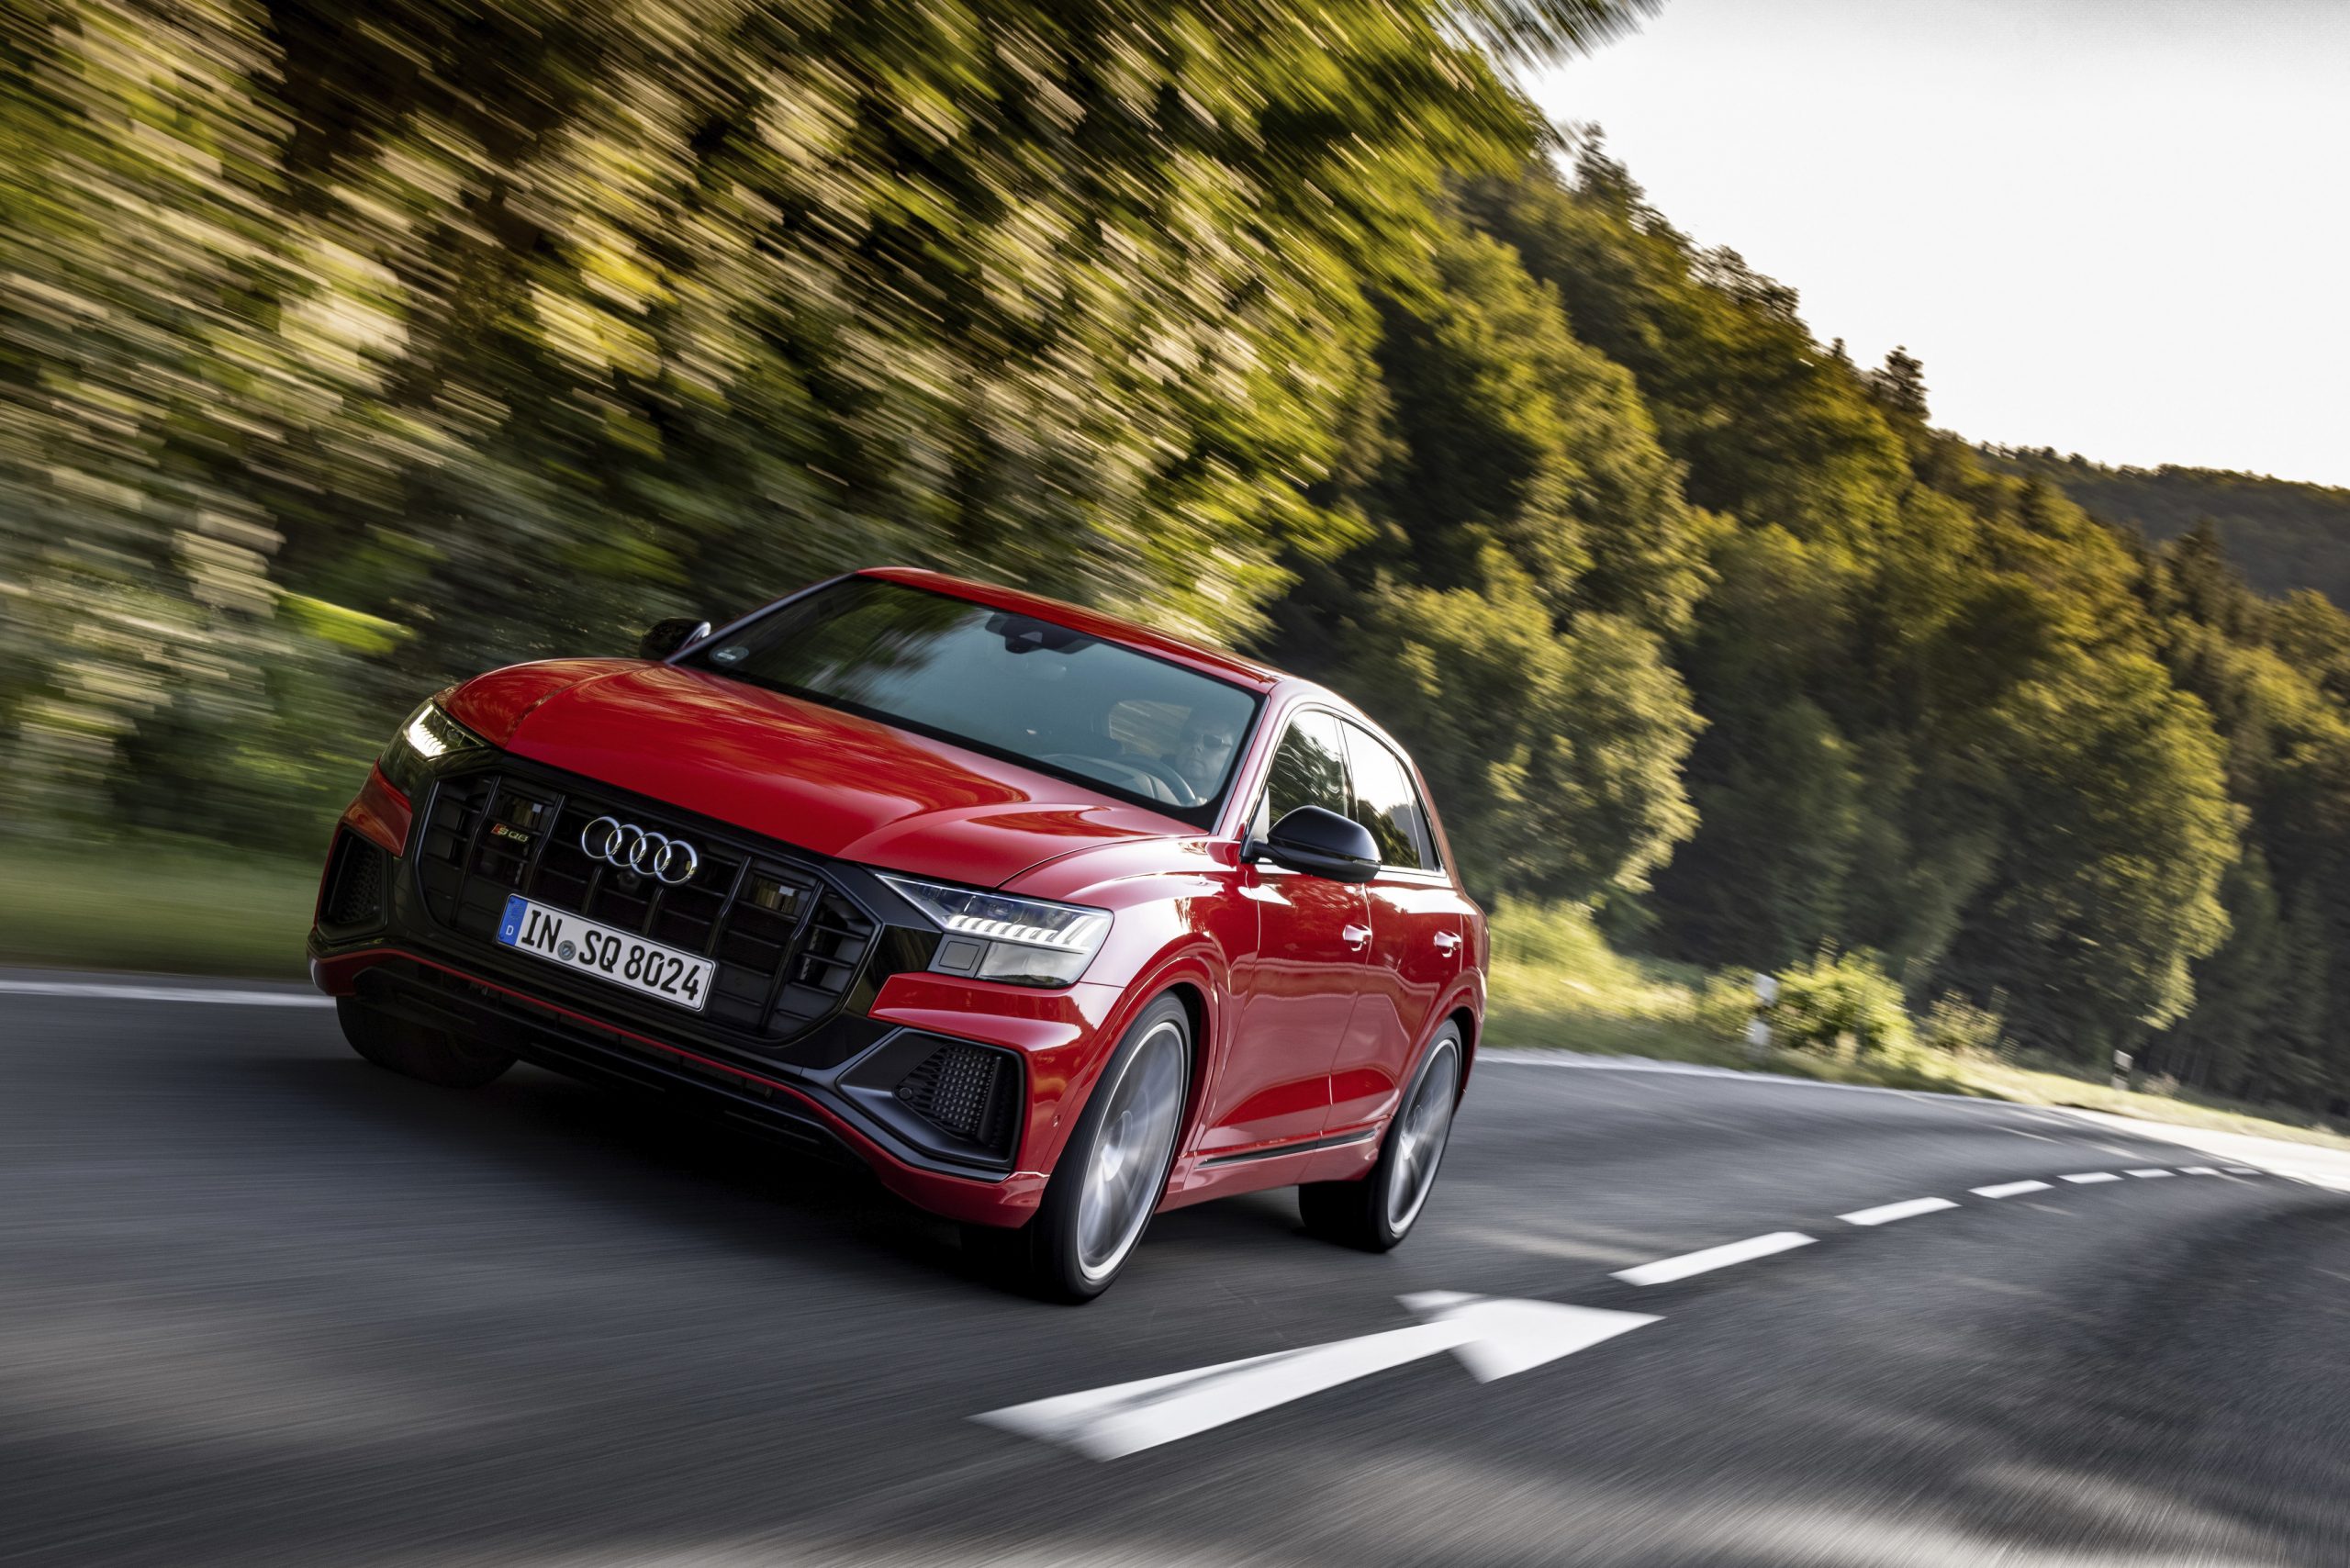 Audi has revealed its most powerful SQ7 and SQ8 V8 diesel engine as a high-performance all-wheel-drive SUV.